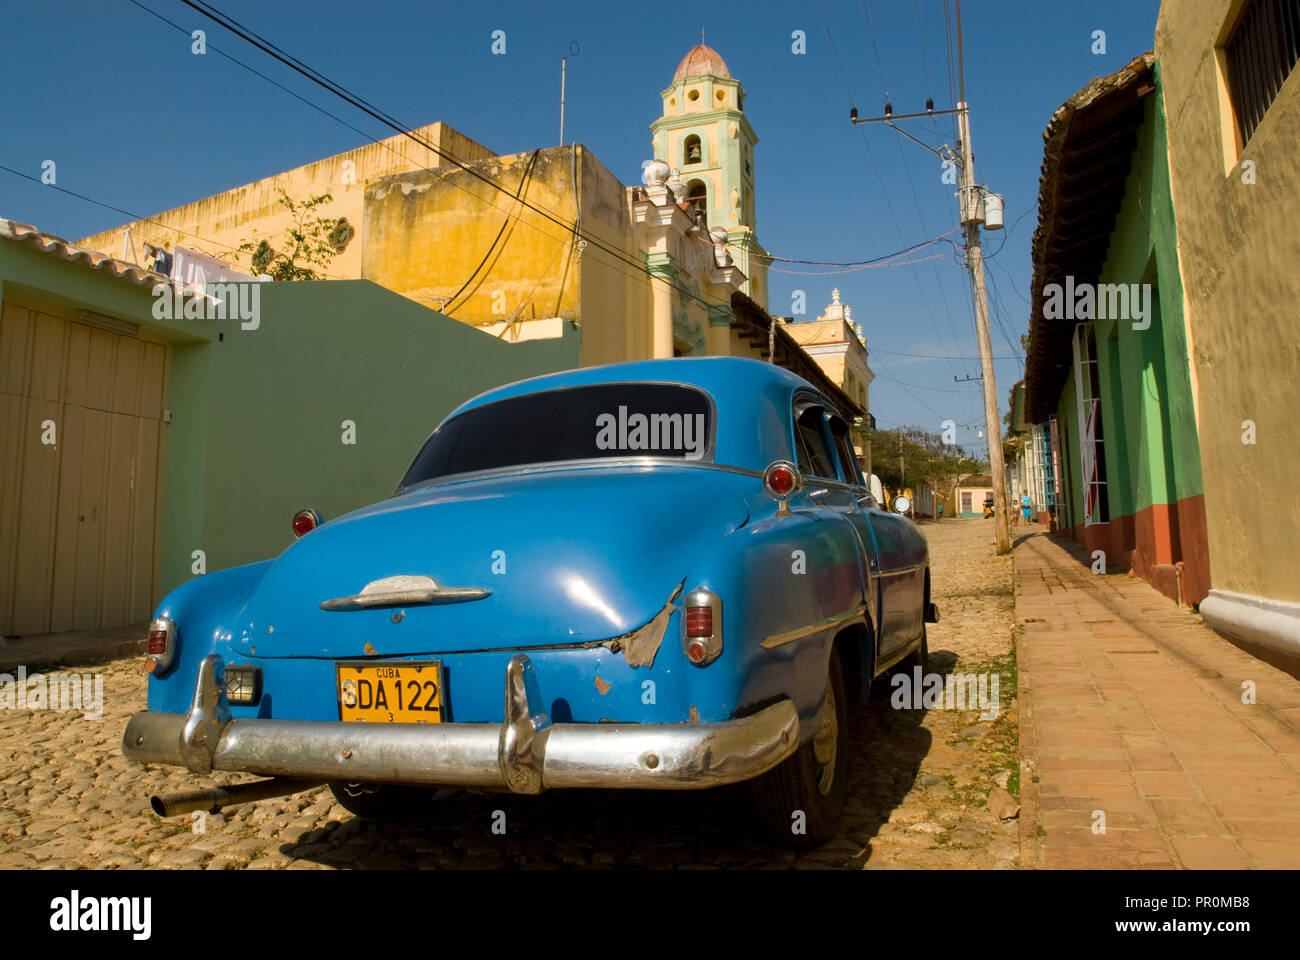 Blue Vintage American Car In The Street Of Trinidad Cuba West Indies Stock Photo